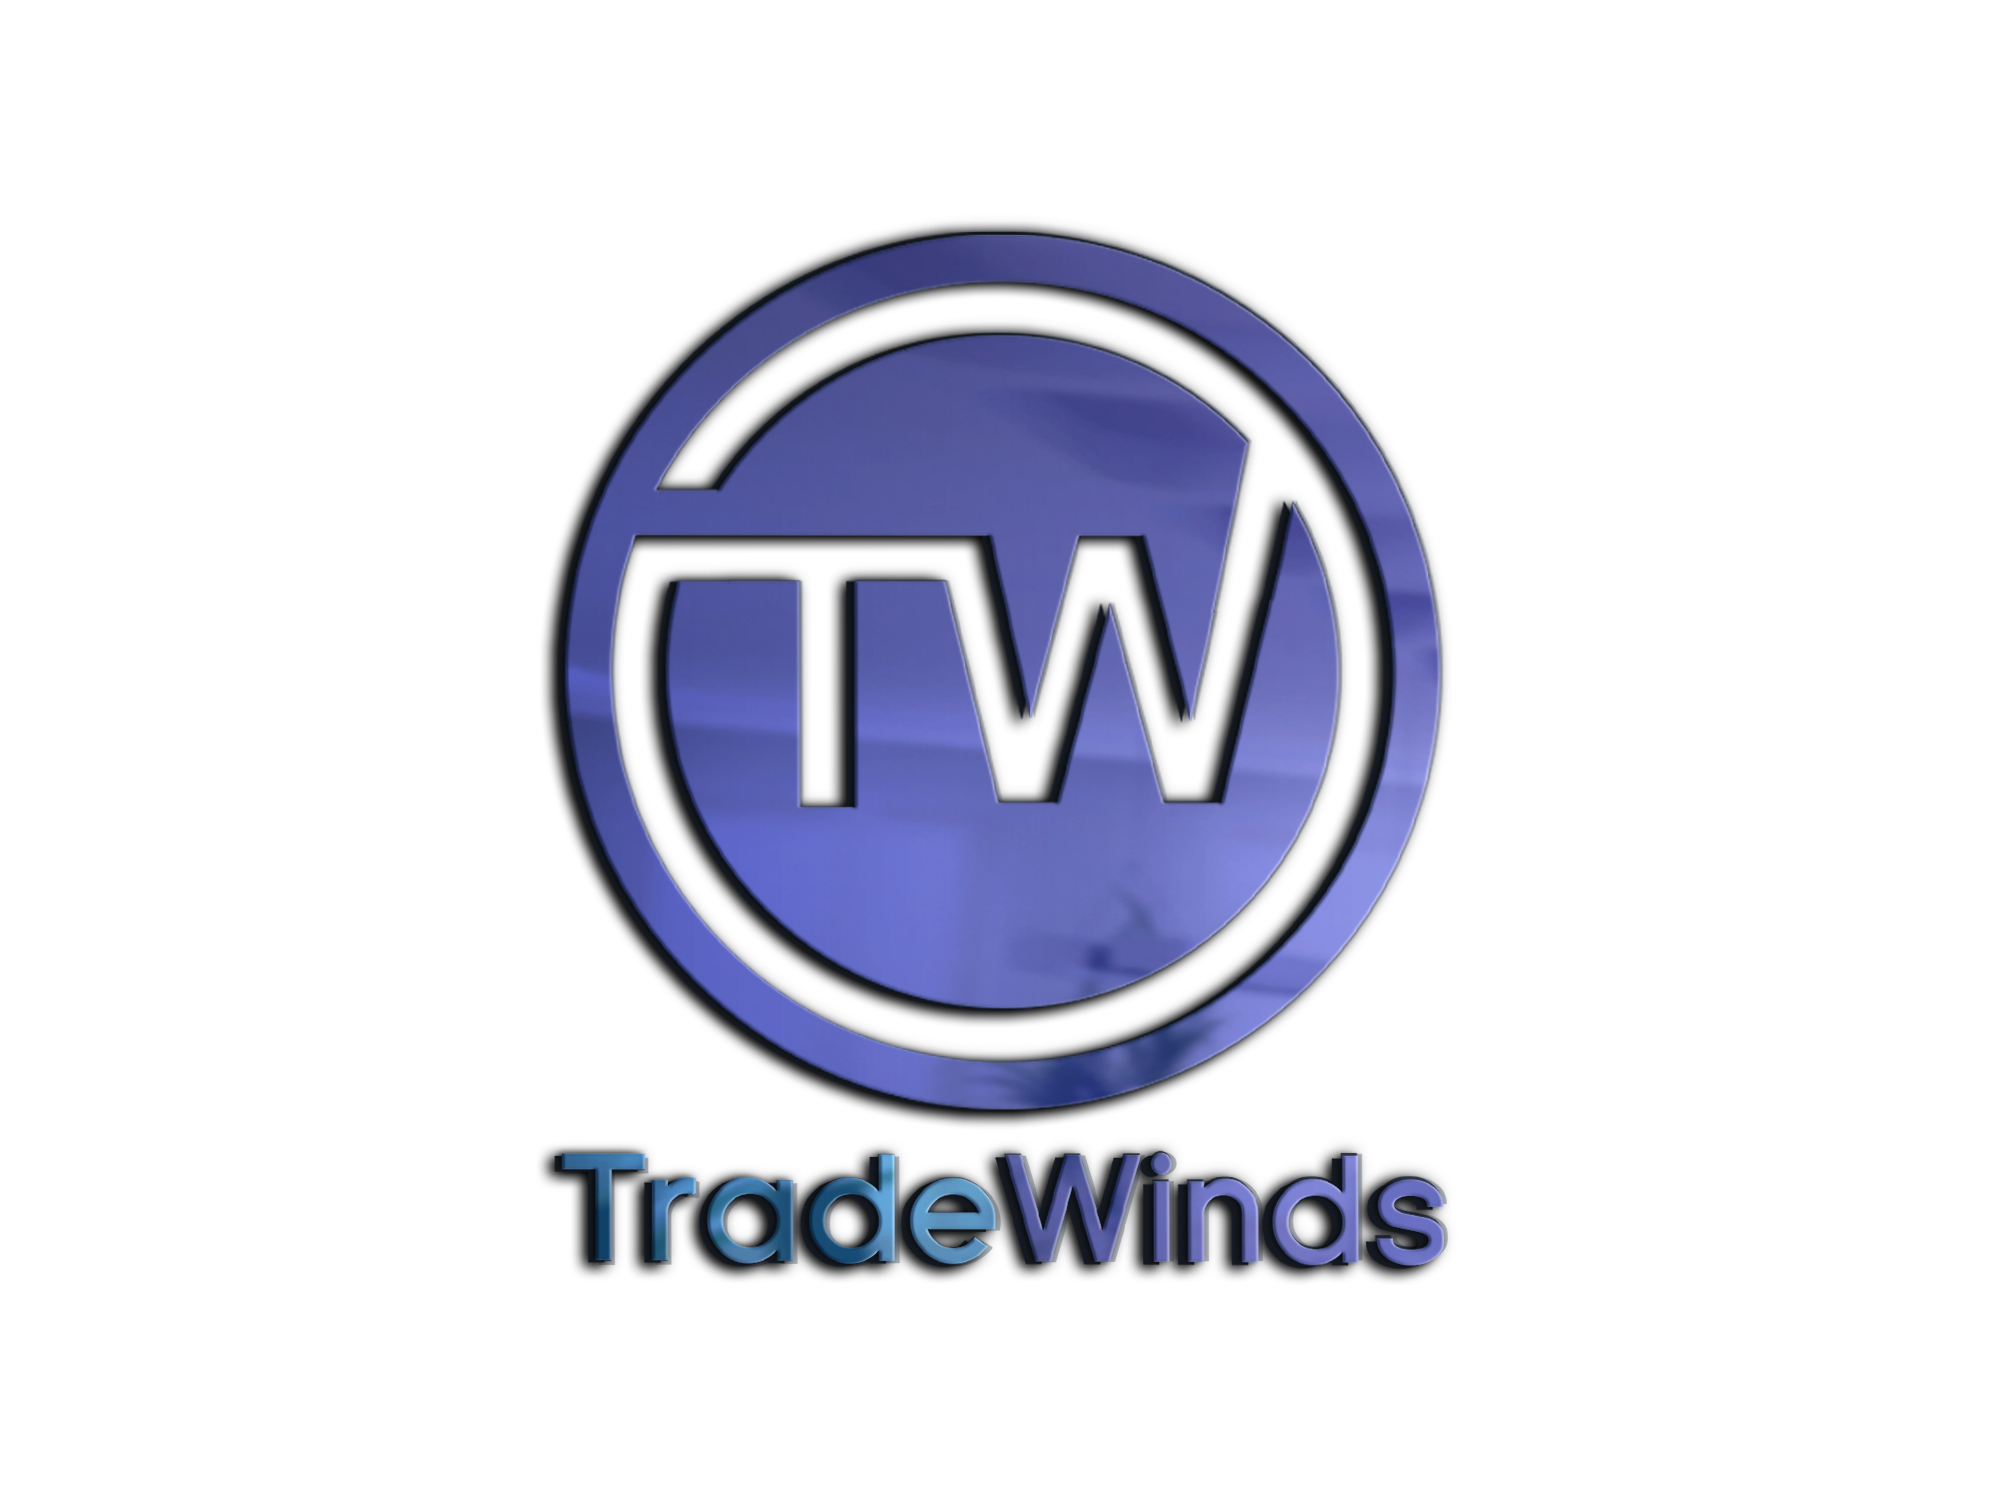 tradewinds cryptocurrency